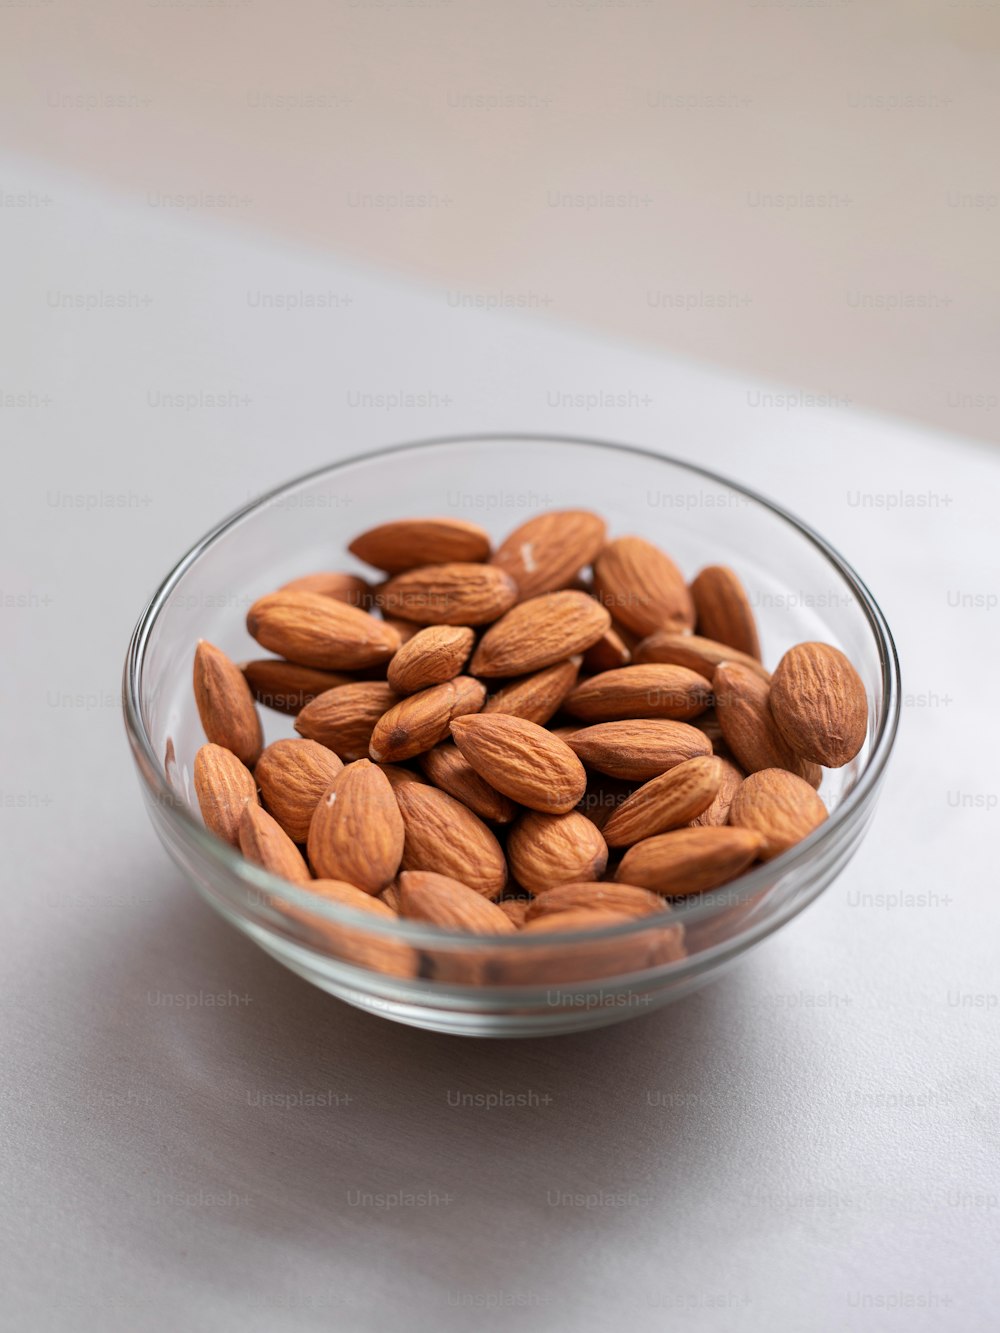 Almonds in a glass bowl on kitchen counter, healthy food for diet.